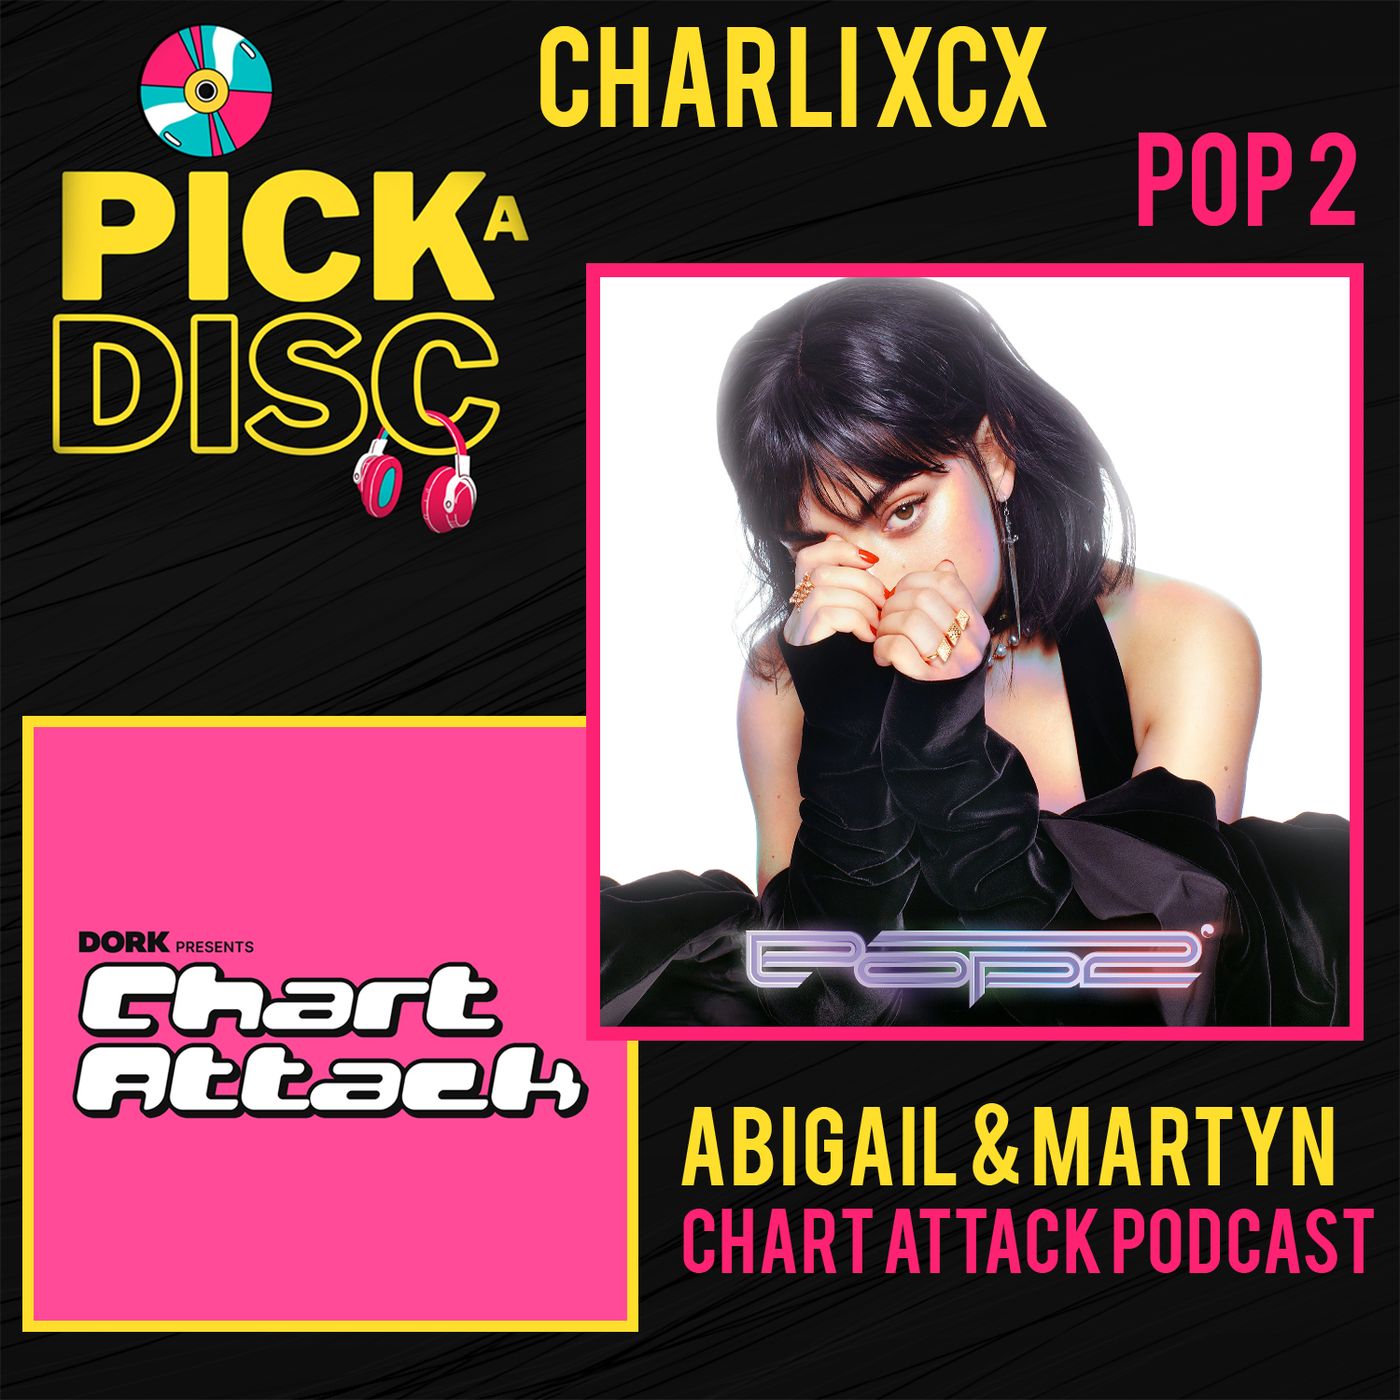 Pop 2: Charli XCX with Abi & Martyn (Chart Attack)